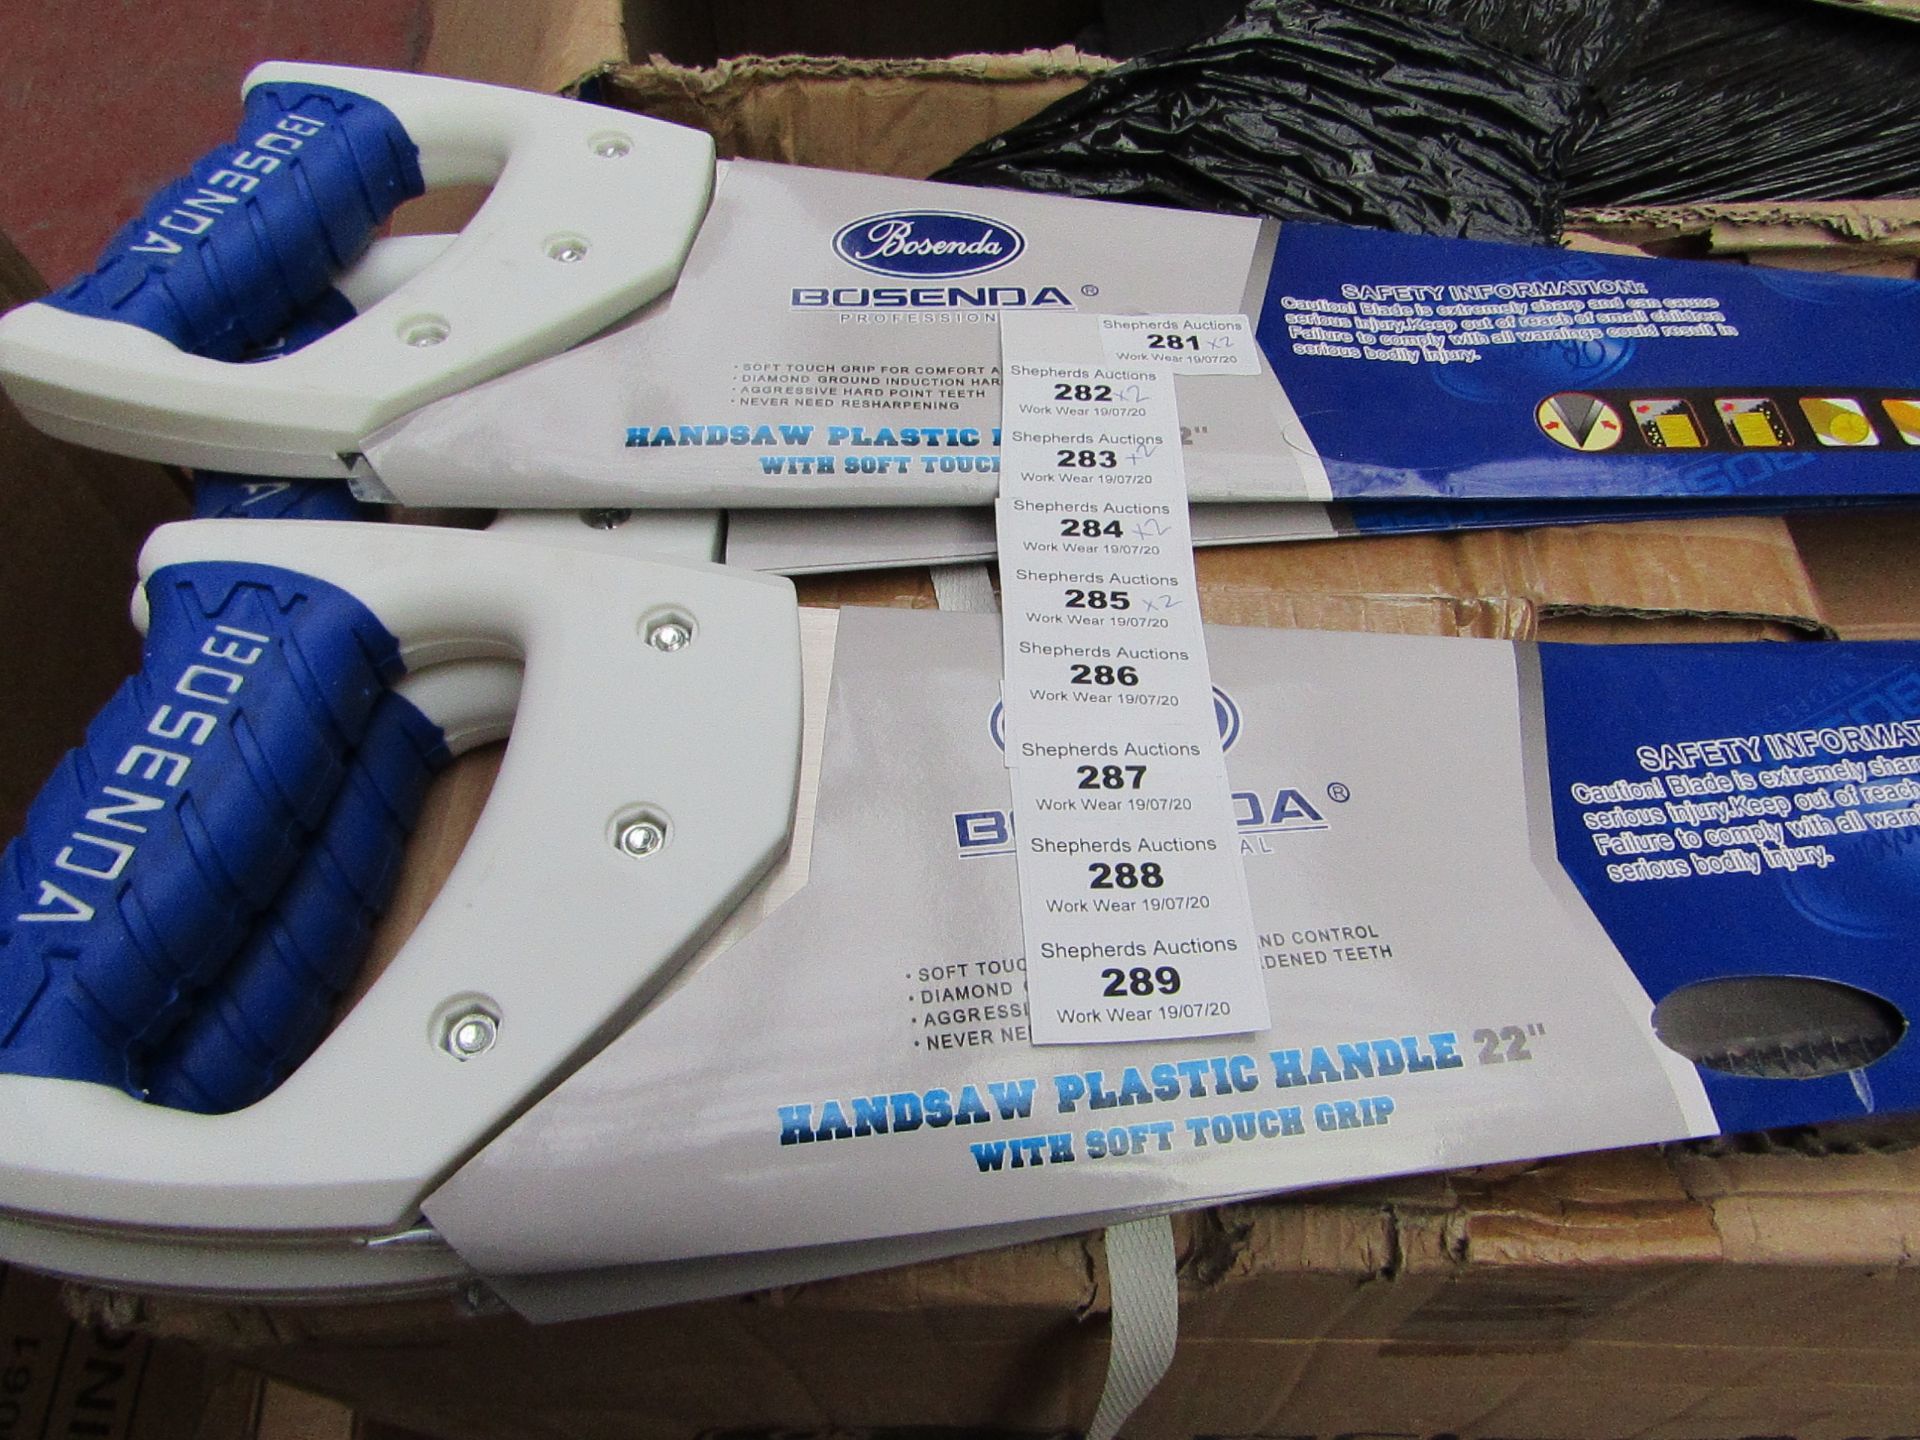 2x Bosenda - Handsaw plastic handle 22" - New and Packaged.